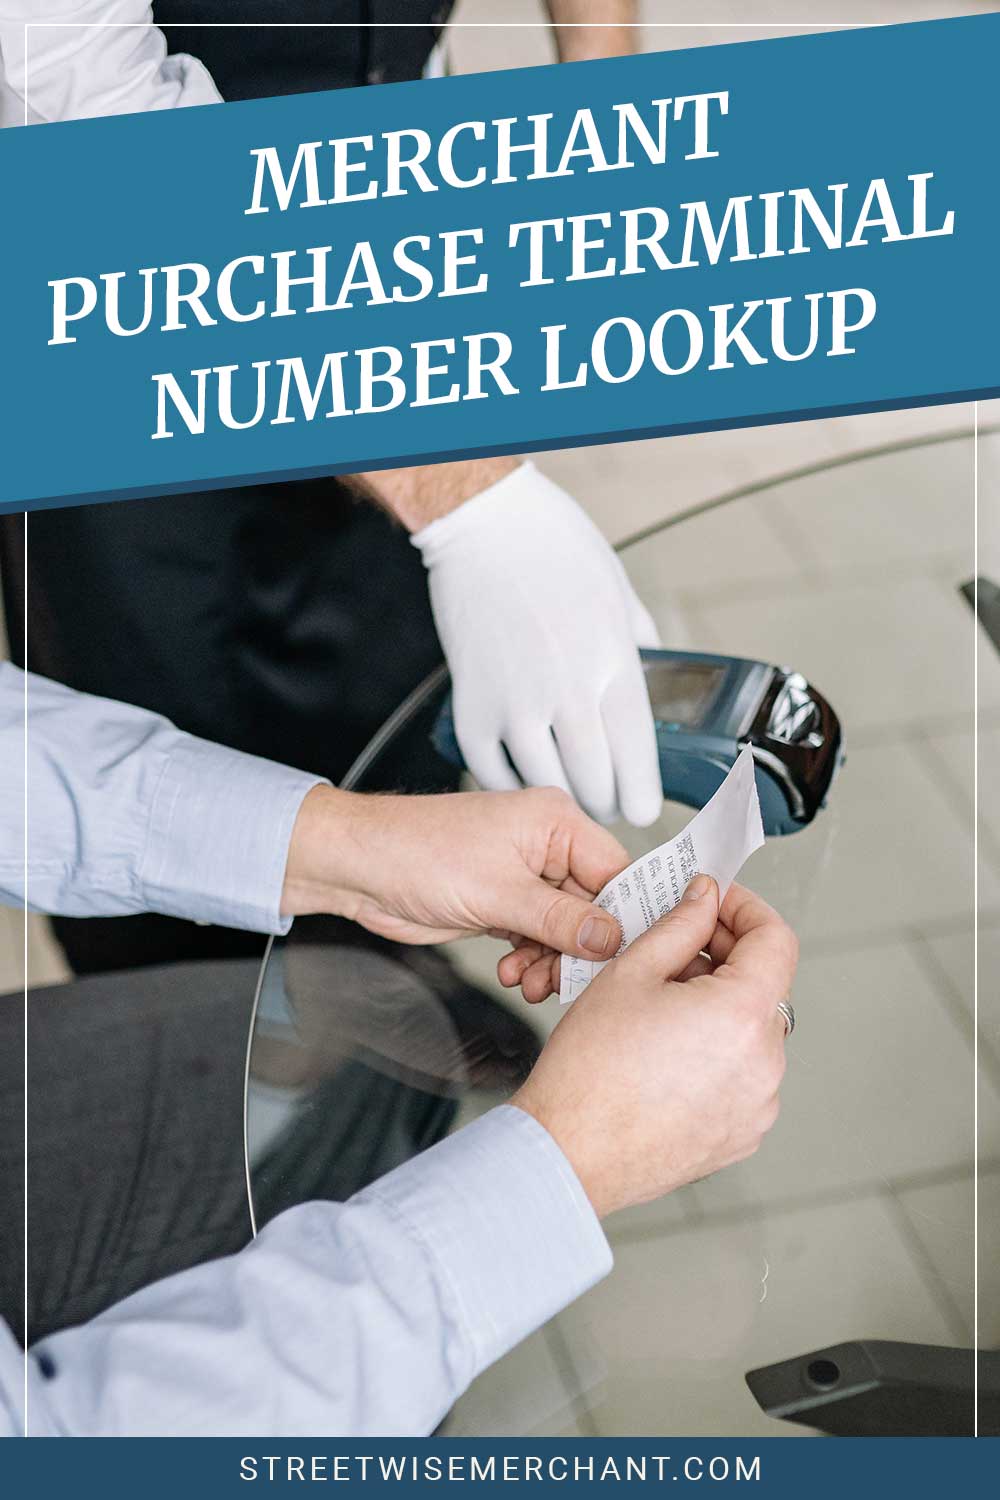 Man checking a payment receipt - Merchant Purchase Terminal Number Lookup